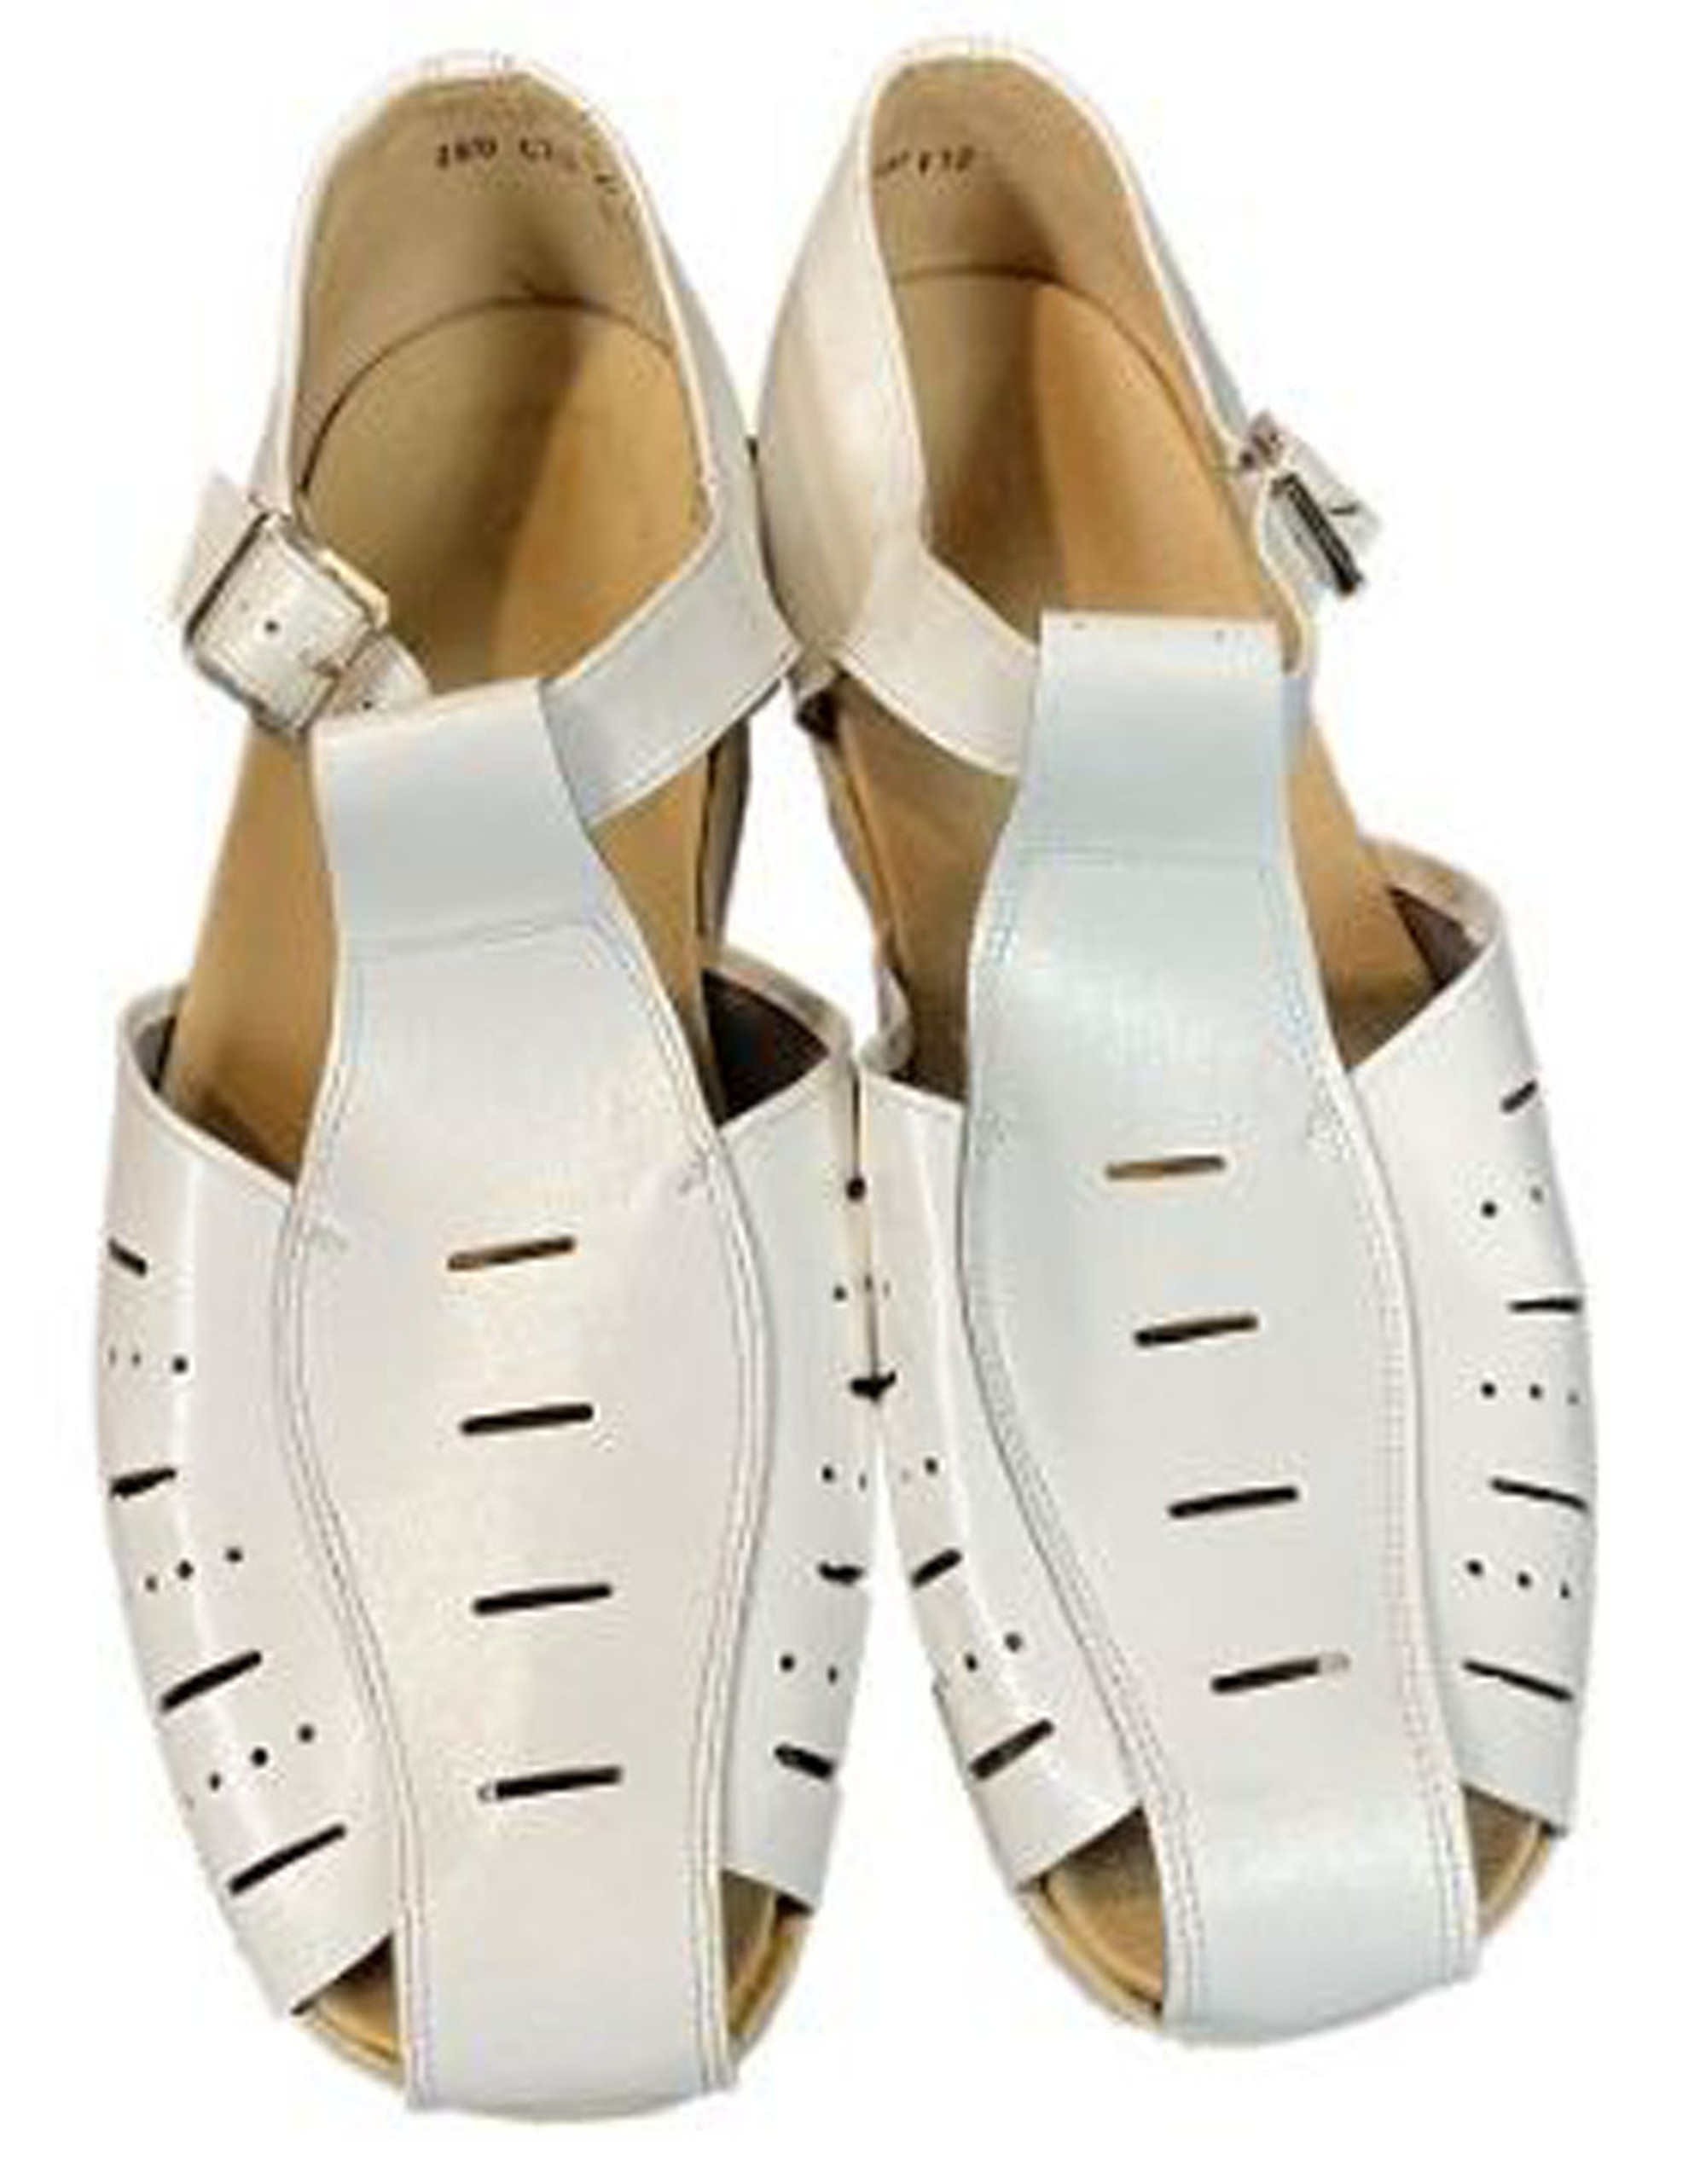 Czech  Armed Forces White Leather Sandals